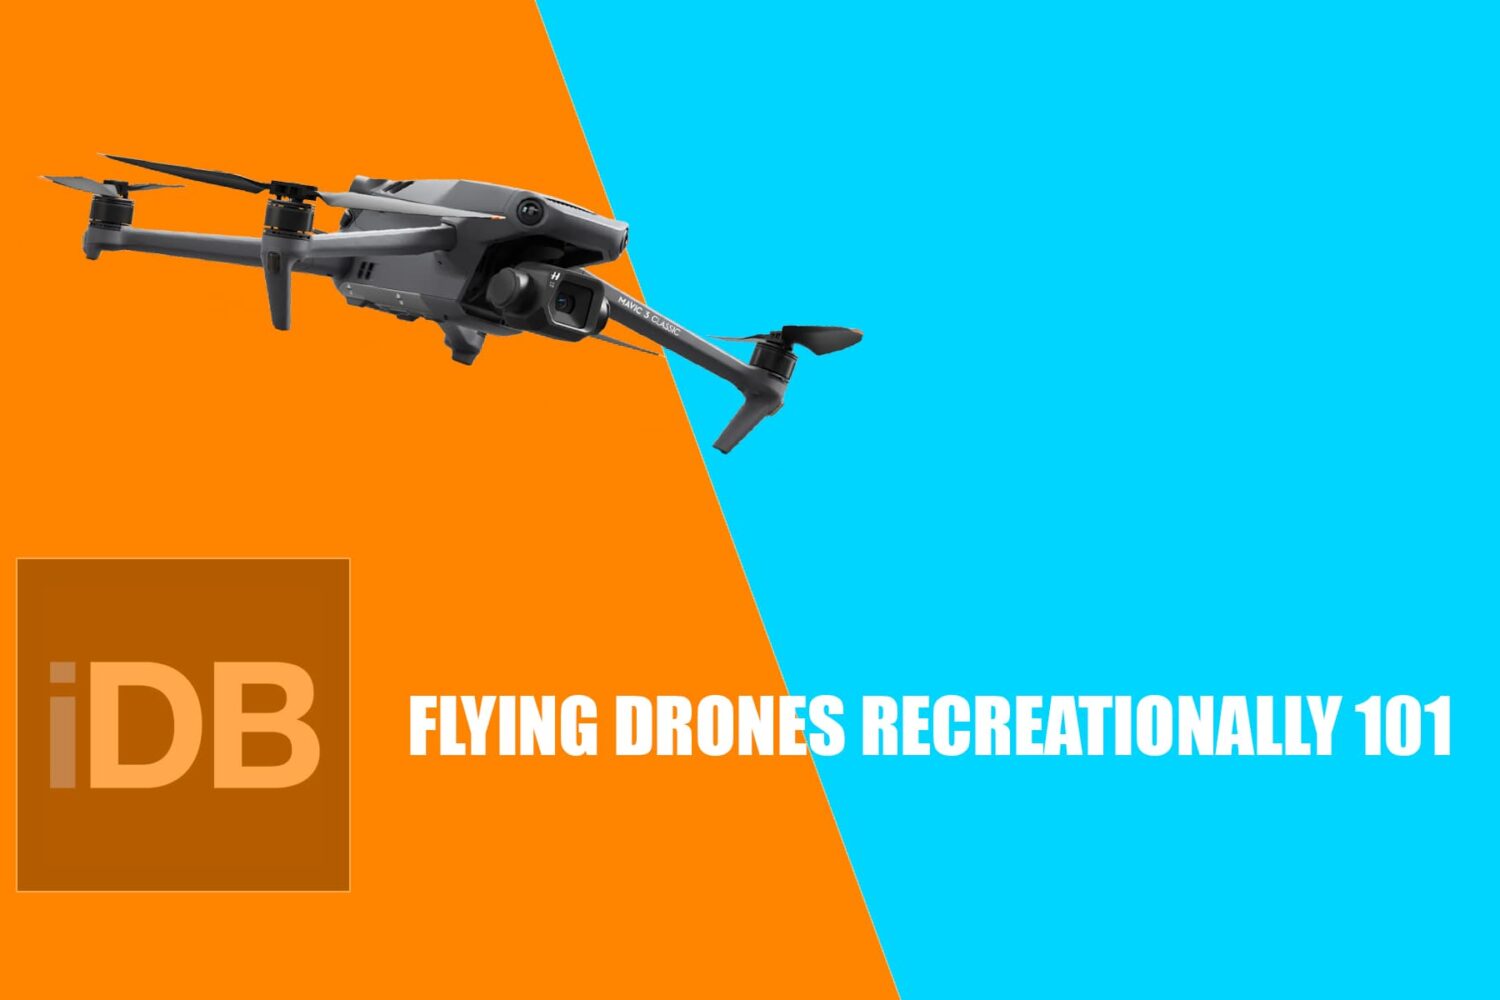 Recreational drone flying.